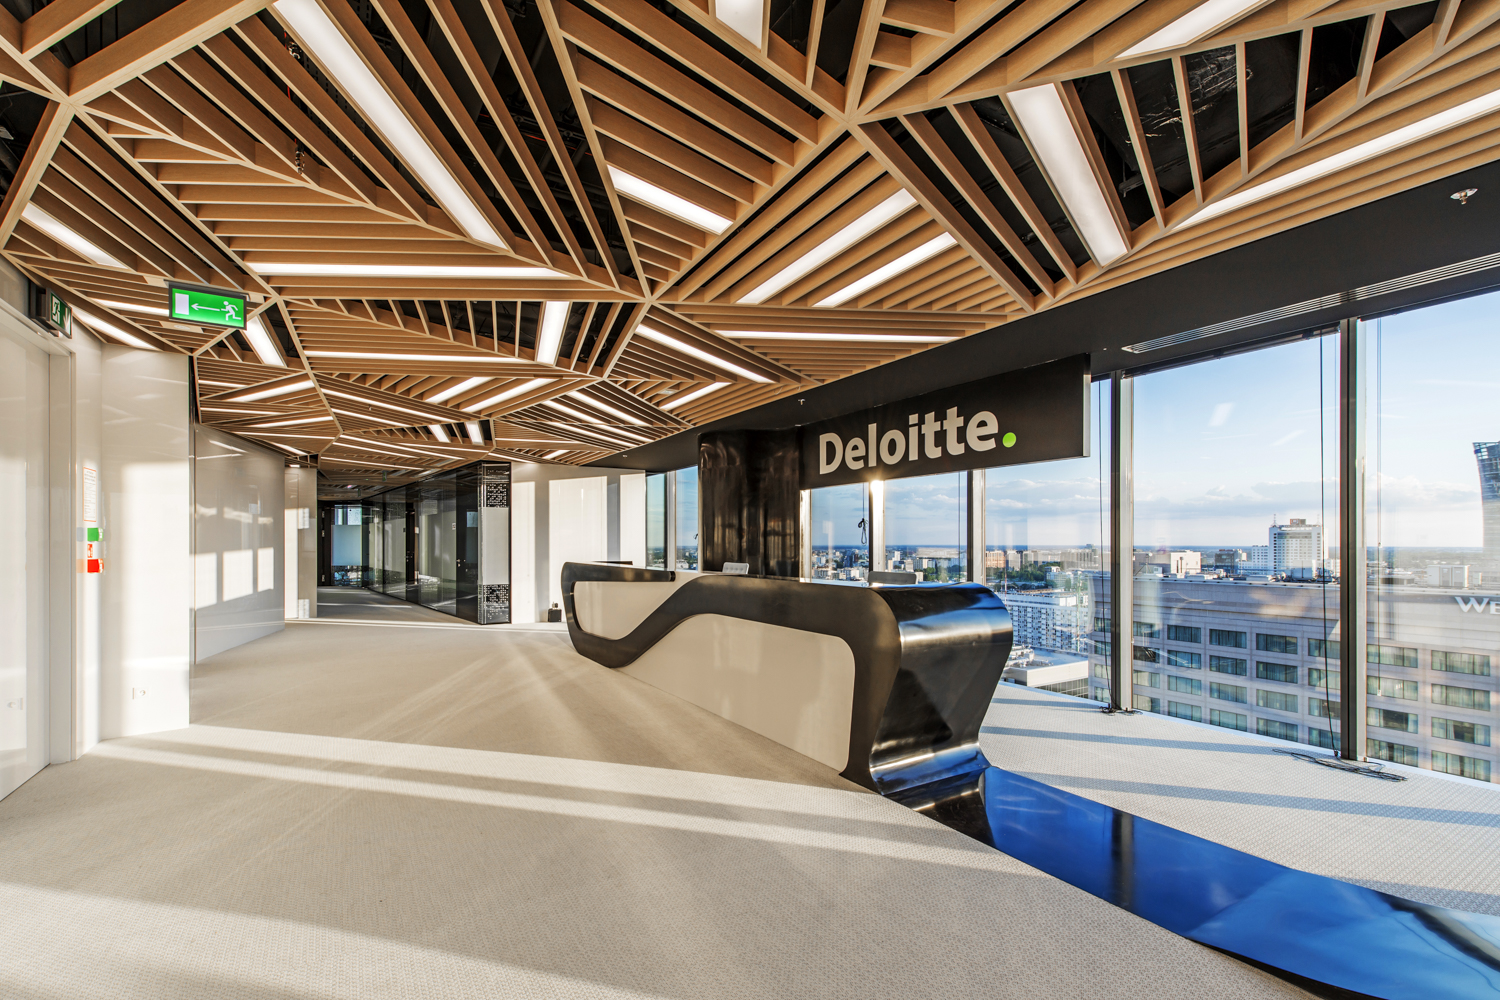  Modern and creative Deloitte office - new way of thinking about the way company works